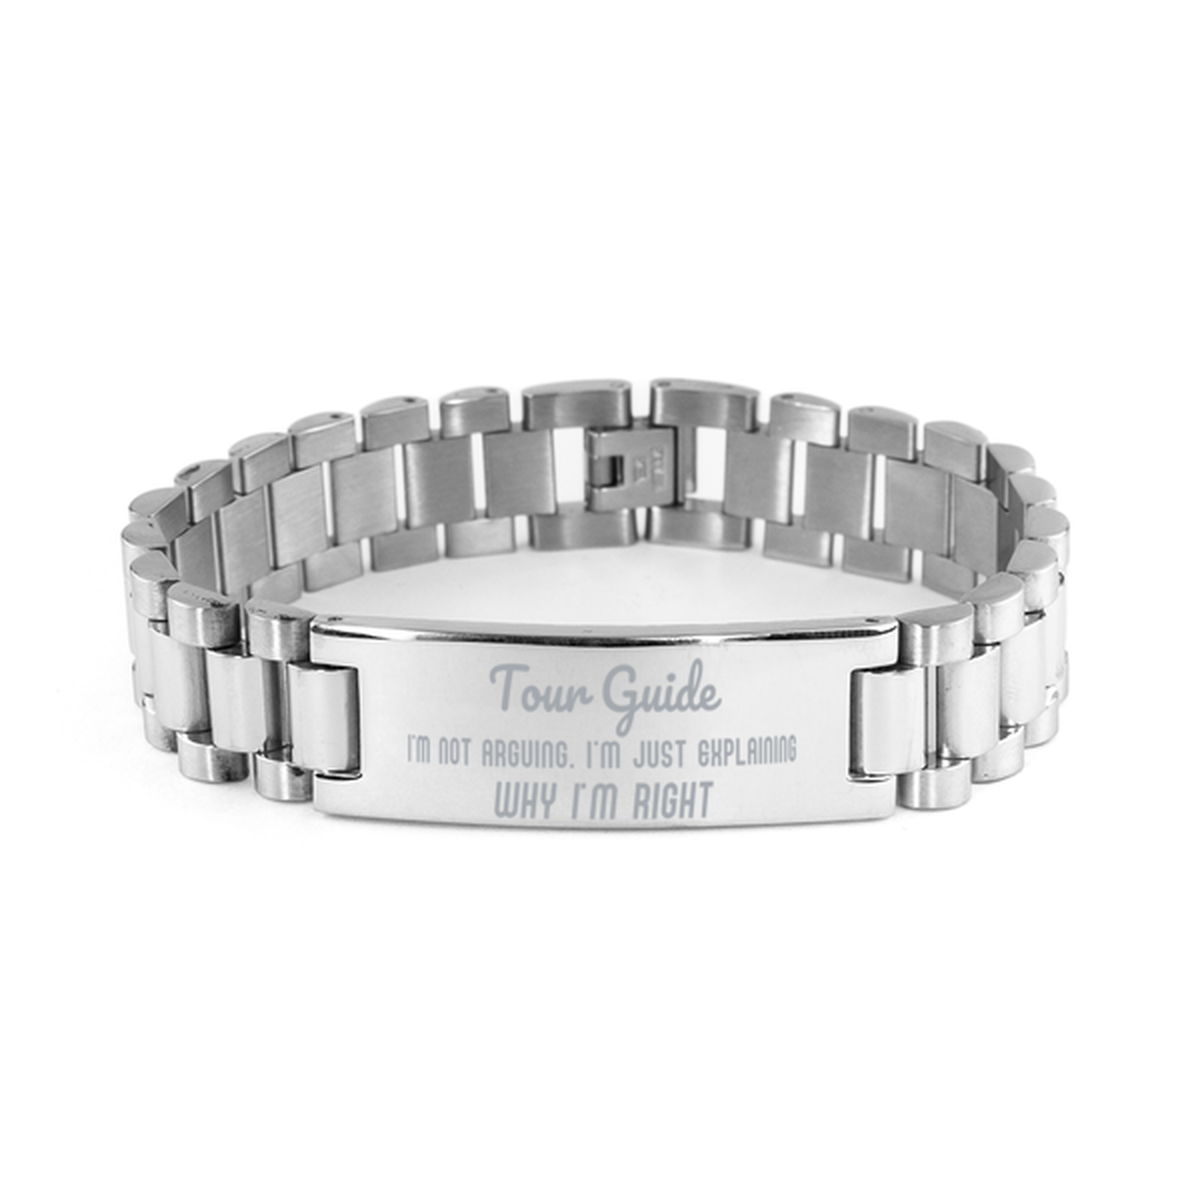 Tour Guide I'm not Arguing. I'm Just Explaining Why I'm RIGHT Ladder Stainless Steel Bracelet, Graduation Birthday Christmas Tour Guide Gifts For Tour Guide Funny Saying Quote Present for Men Women Coworker